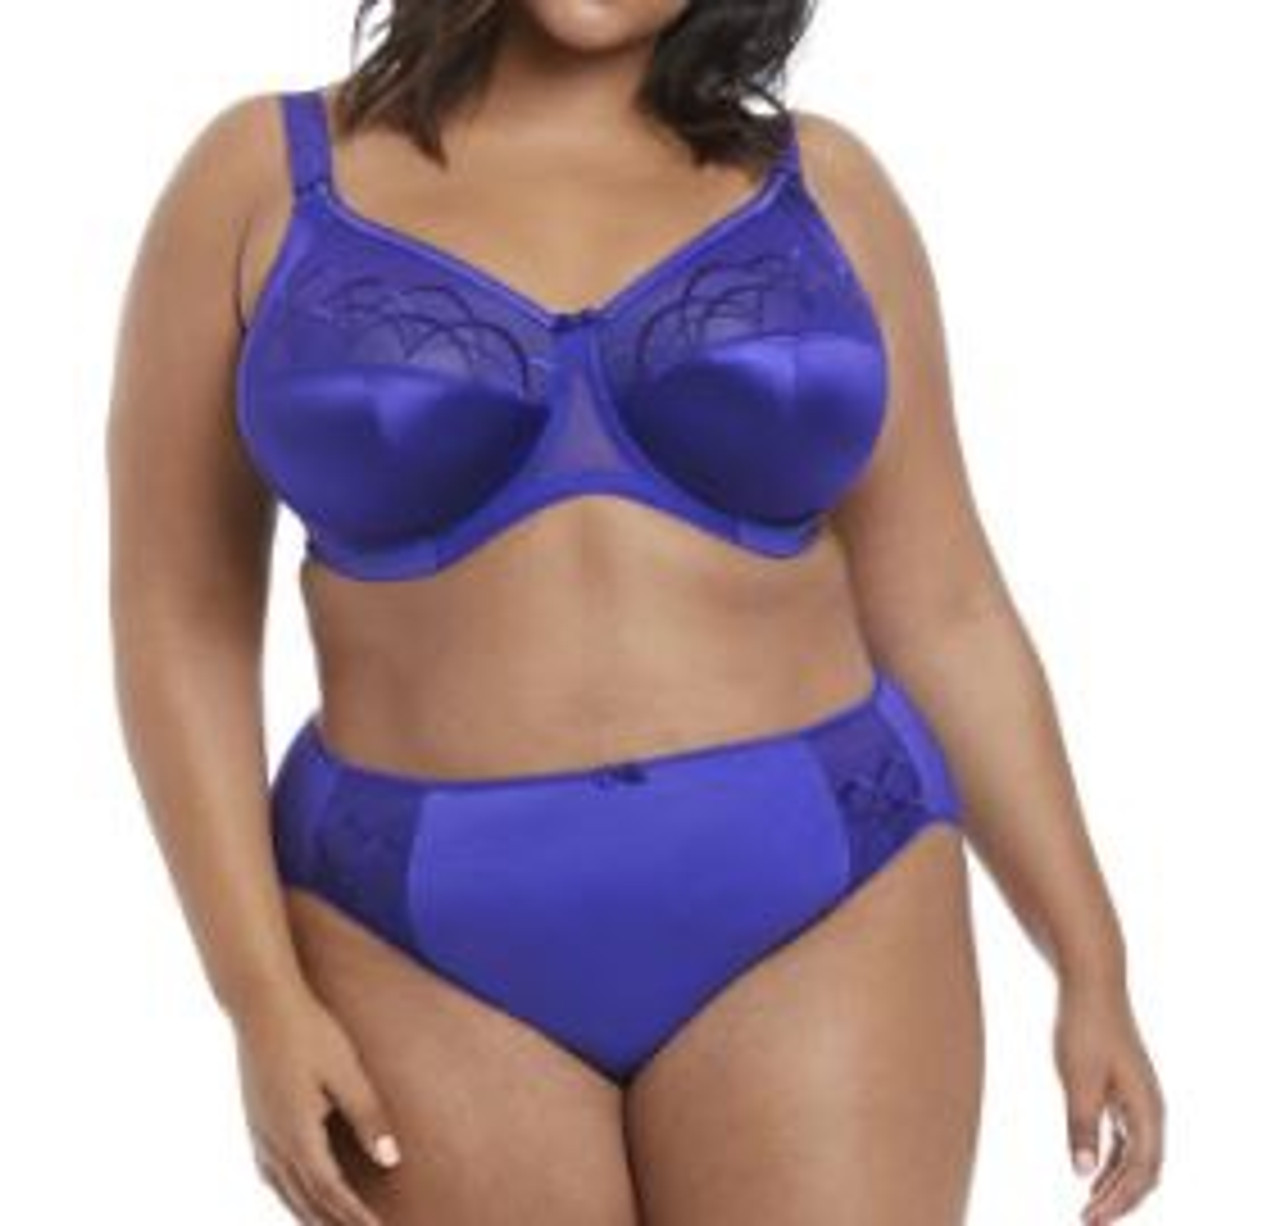 Elomi Cate Underwire Full Cup Banded Bra in Raisin (RAN) FINAL SALE  NORMALLY $59